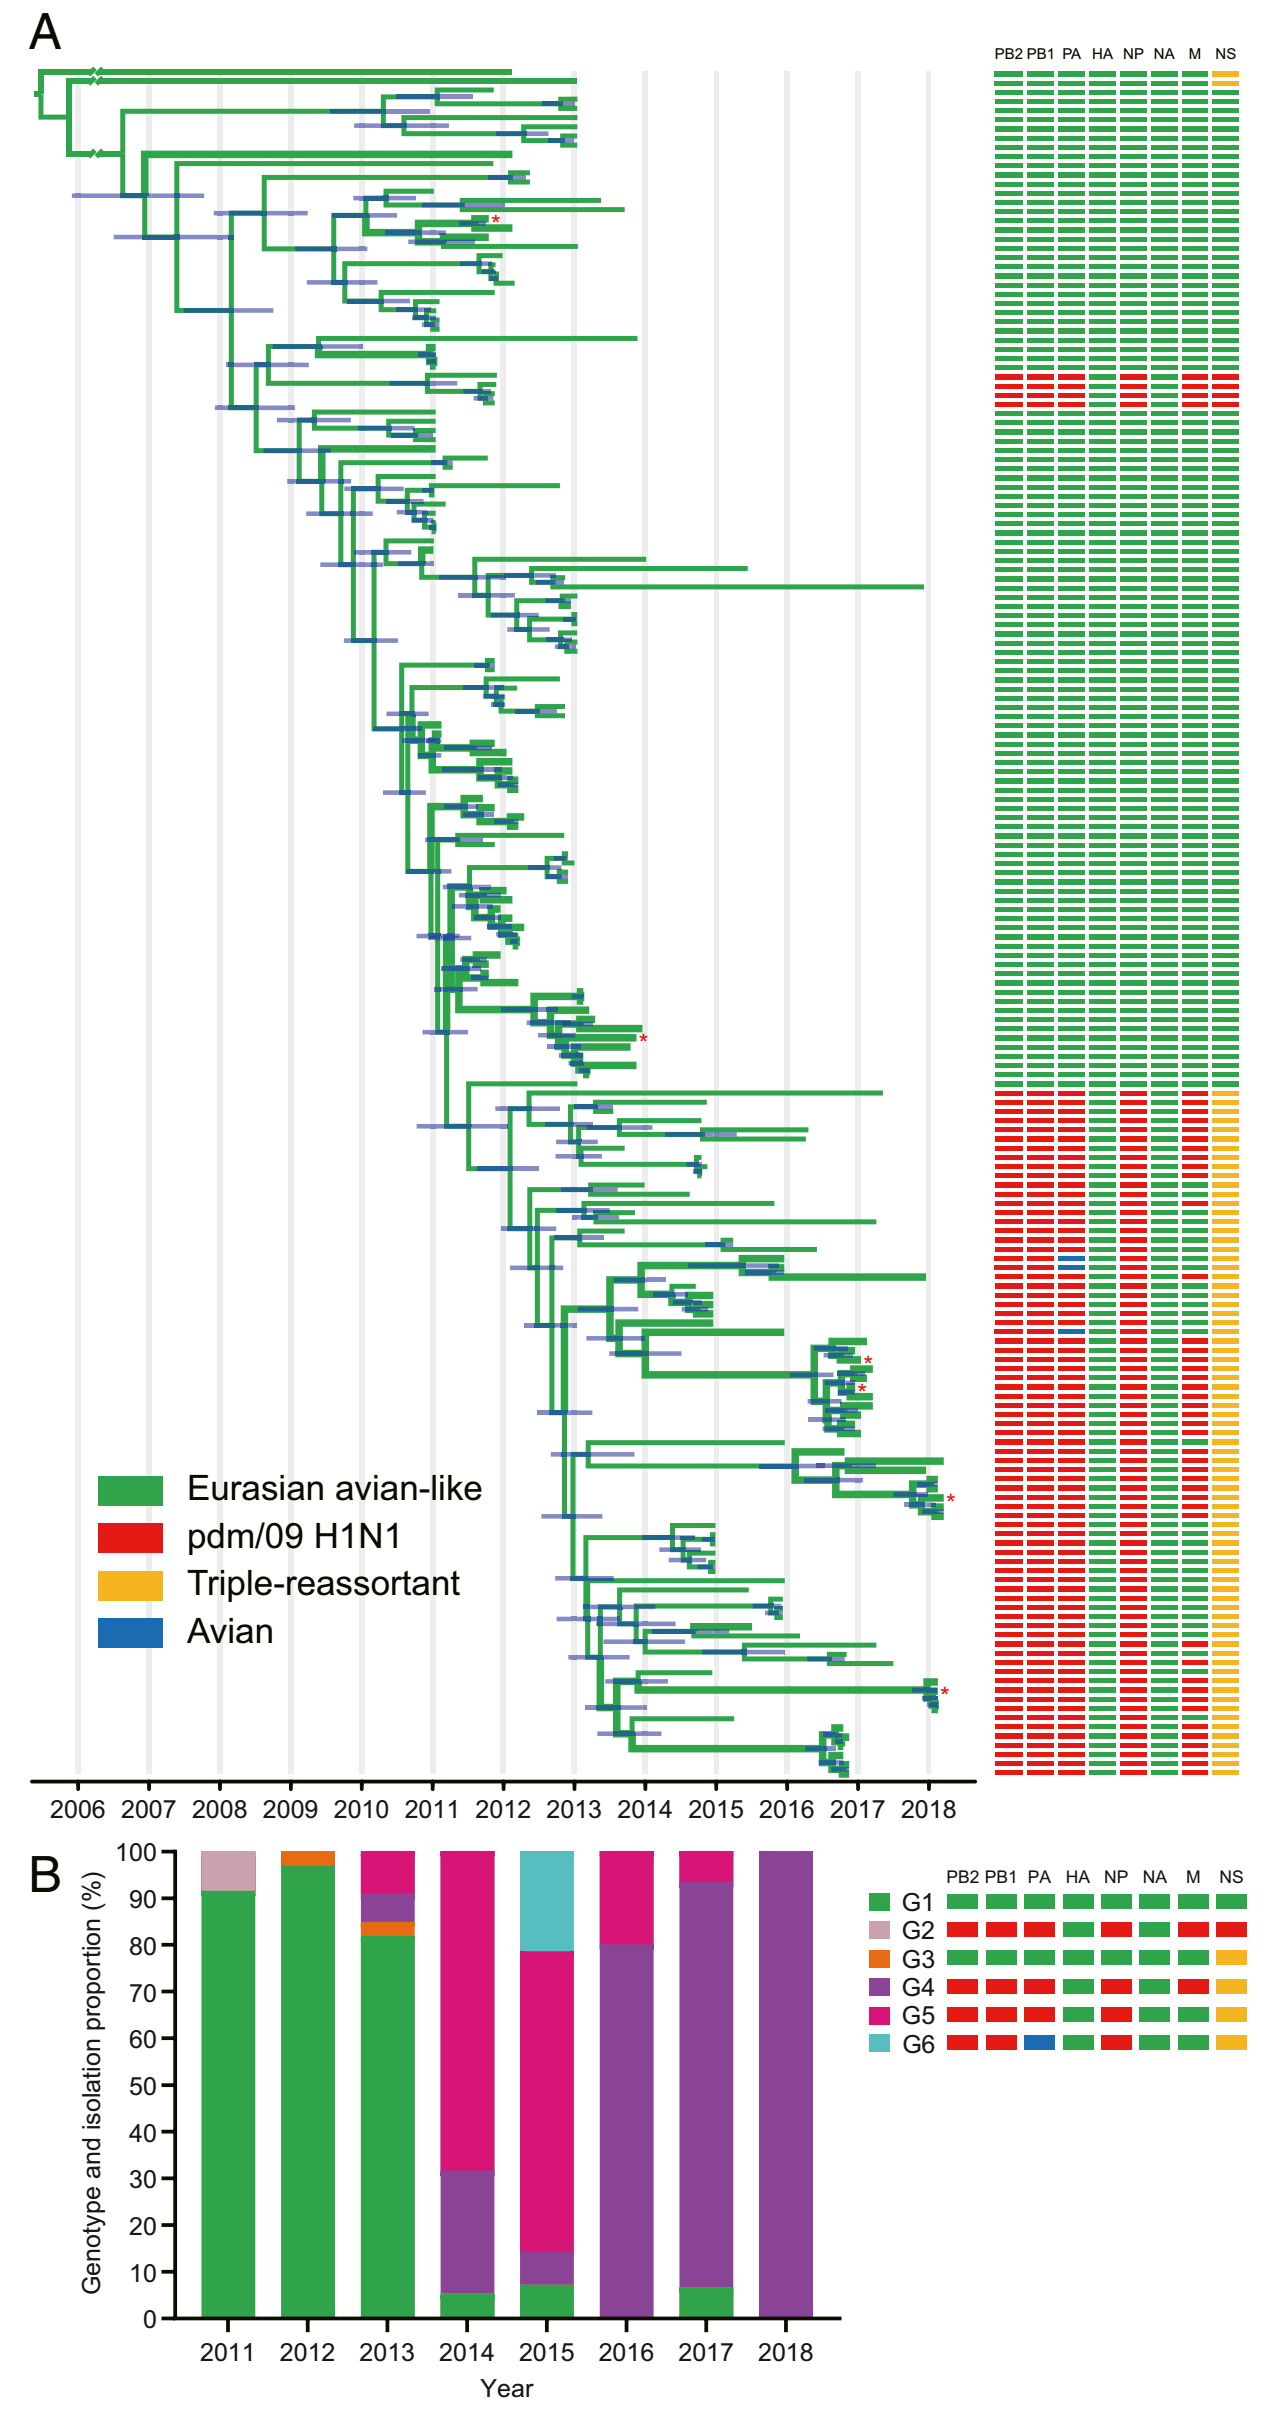 A flow chart diagram and a bar graph of gene mutations showing many mutations are being tracked